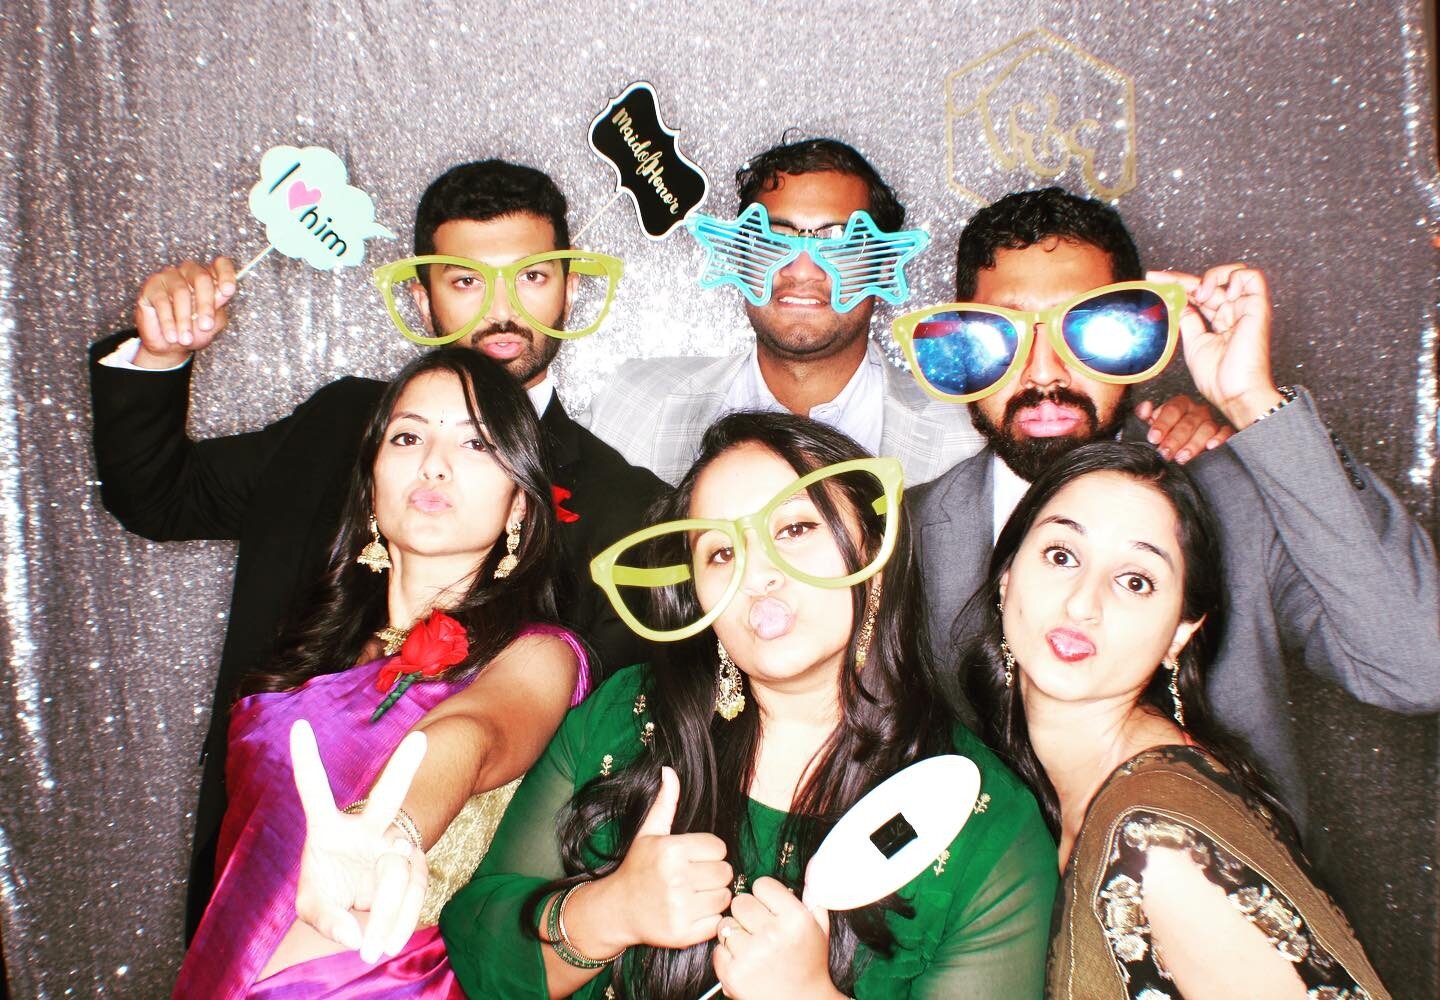 Grab a Prop and strike a pose #SloMoe #wedding #photobooth #chicago